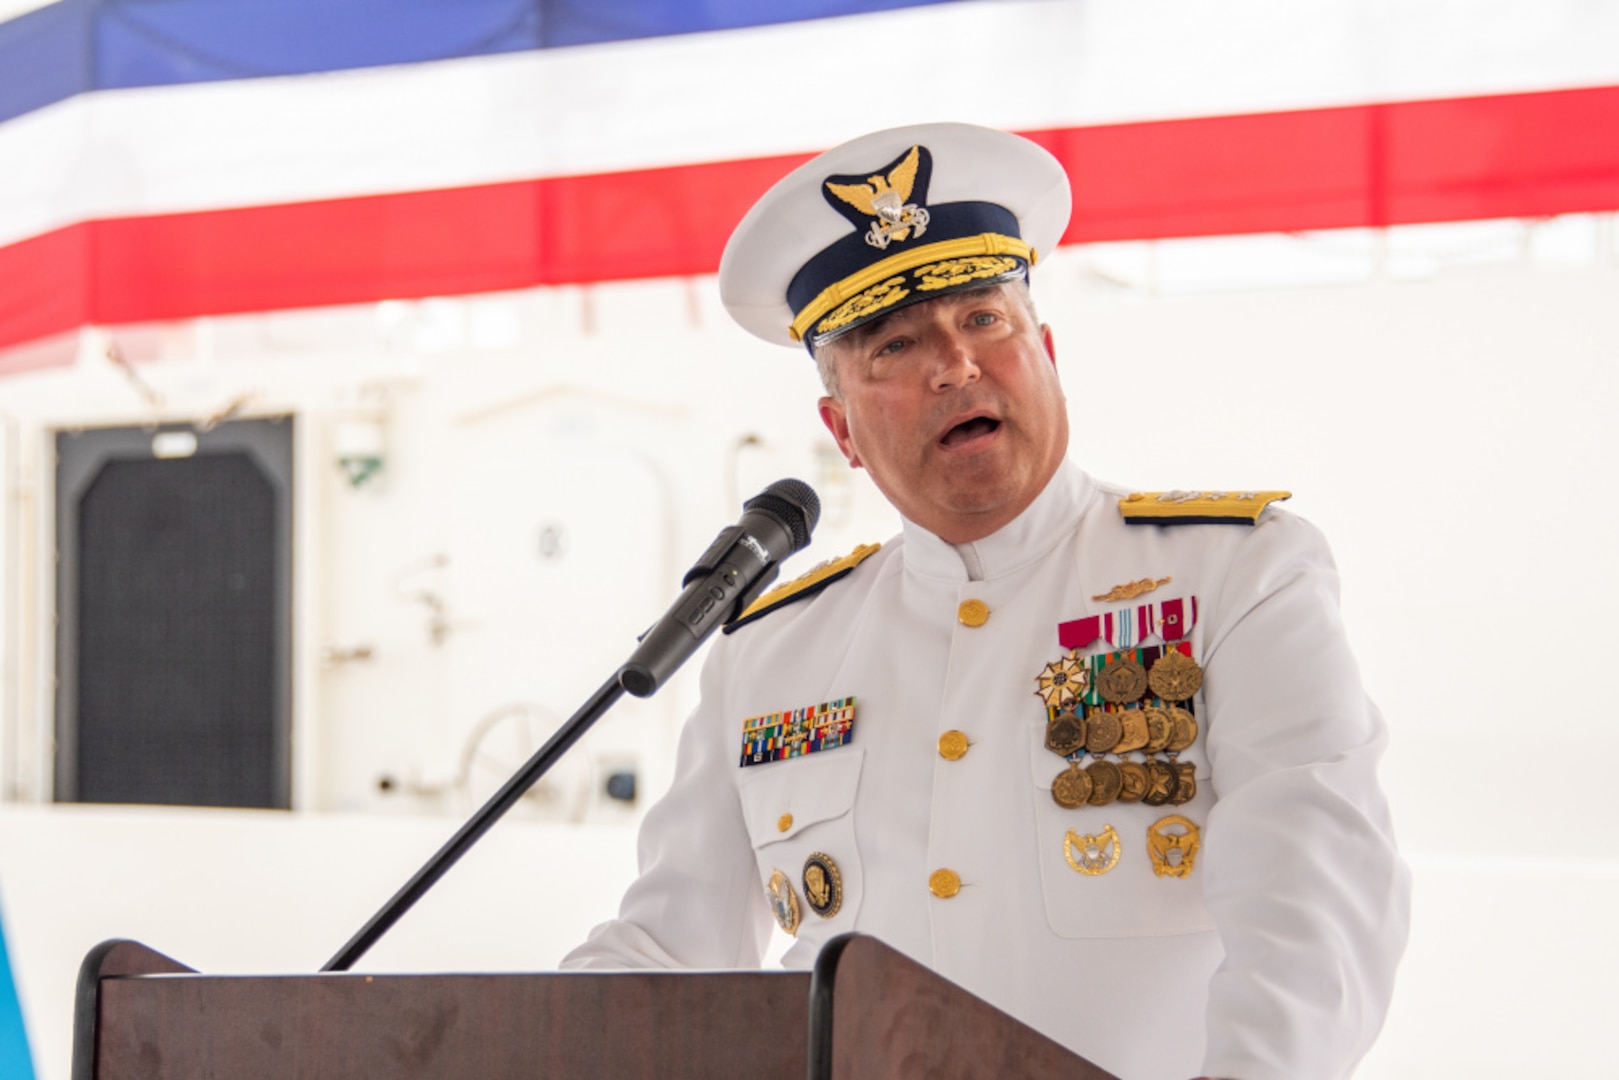 Rear Adm. Matthew W. Sibley, the Commander of the 14th Coast Guard District, speaks during a rare triple-commissioning ceremony at Coast Guard Sector Guam July 29, 2021. During the ceremony, Coast Guard Cutters Myrtle Hazard, Oliver Henry and Fredrick Hatch were commissioned. (U.S. Coast Guard photo by Petty Officer 1st Class Travis Magee/Released)